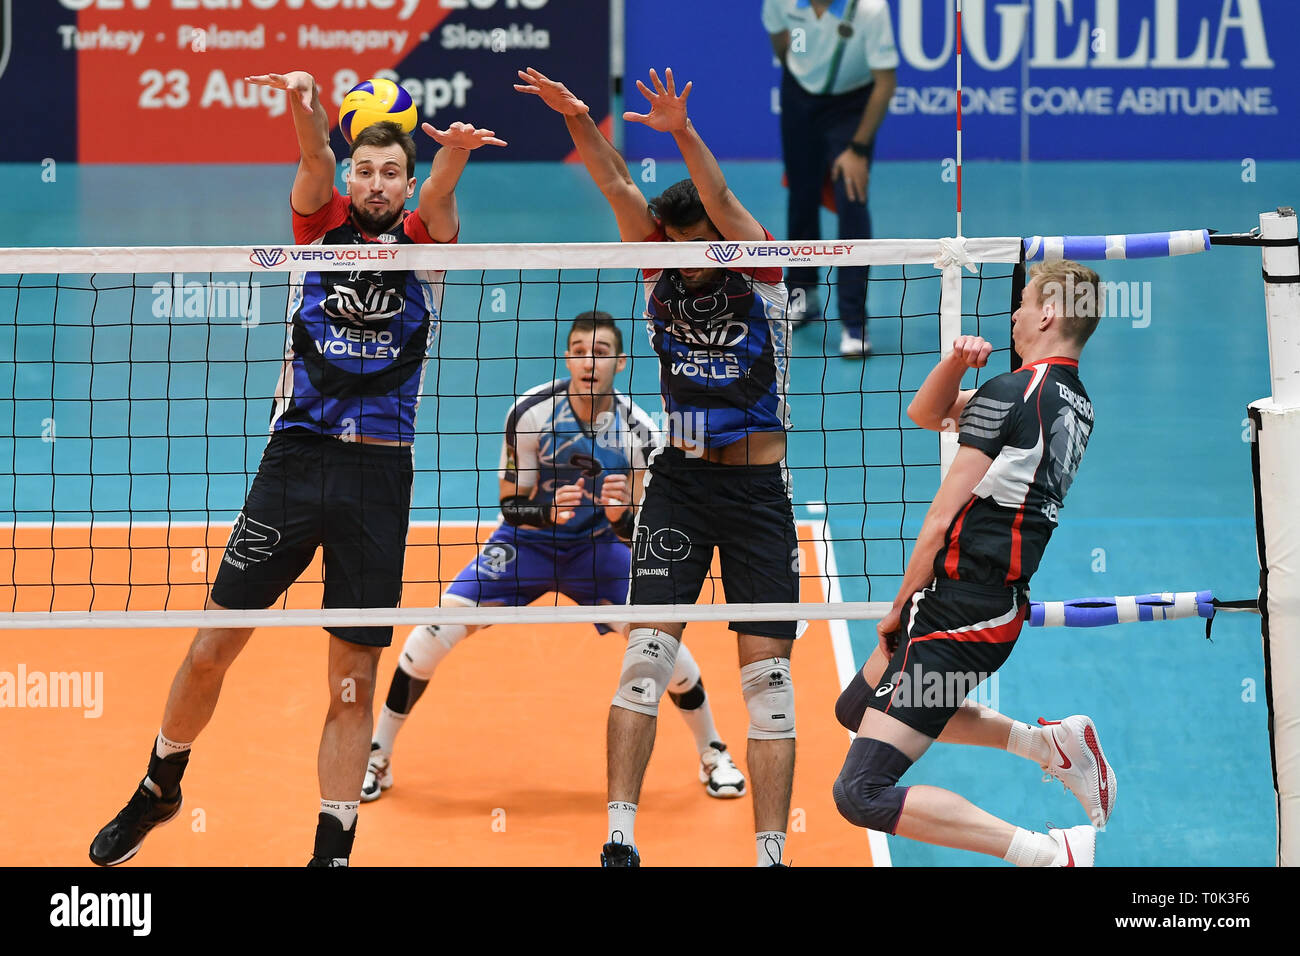 Candy Arena, Monza, Italy. 20th March, 2019. CEV Volleyball Challenge Cup men, Final, 1st leg. Denis Zemchenok of Belogorie Belgorod during the match between Vero Volley Monza and Belogorie Belgorod at the Candy Arena Italy.  Credit: Claudio Grassi/Alamy Live News Stock Photo